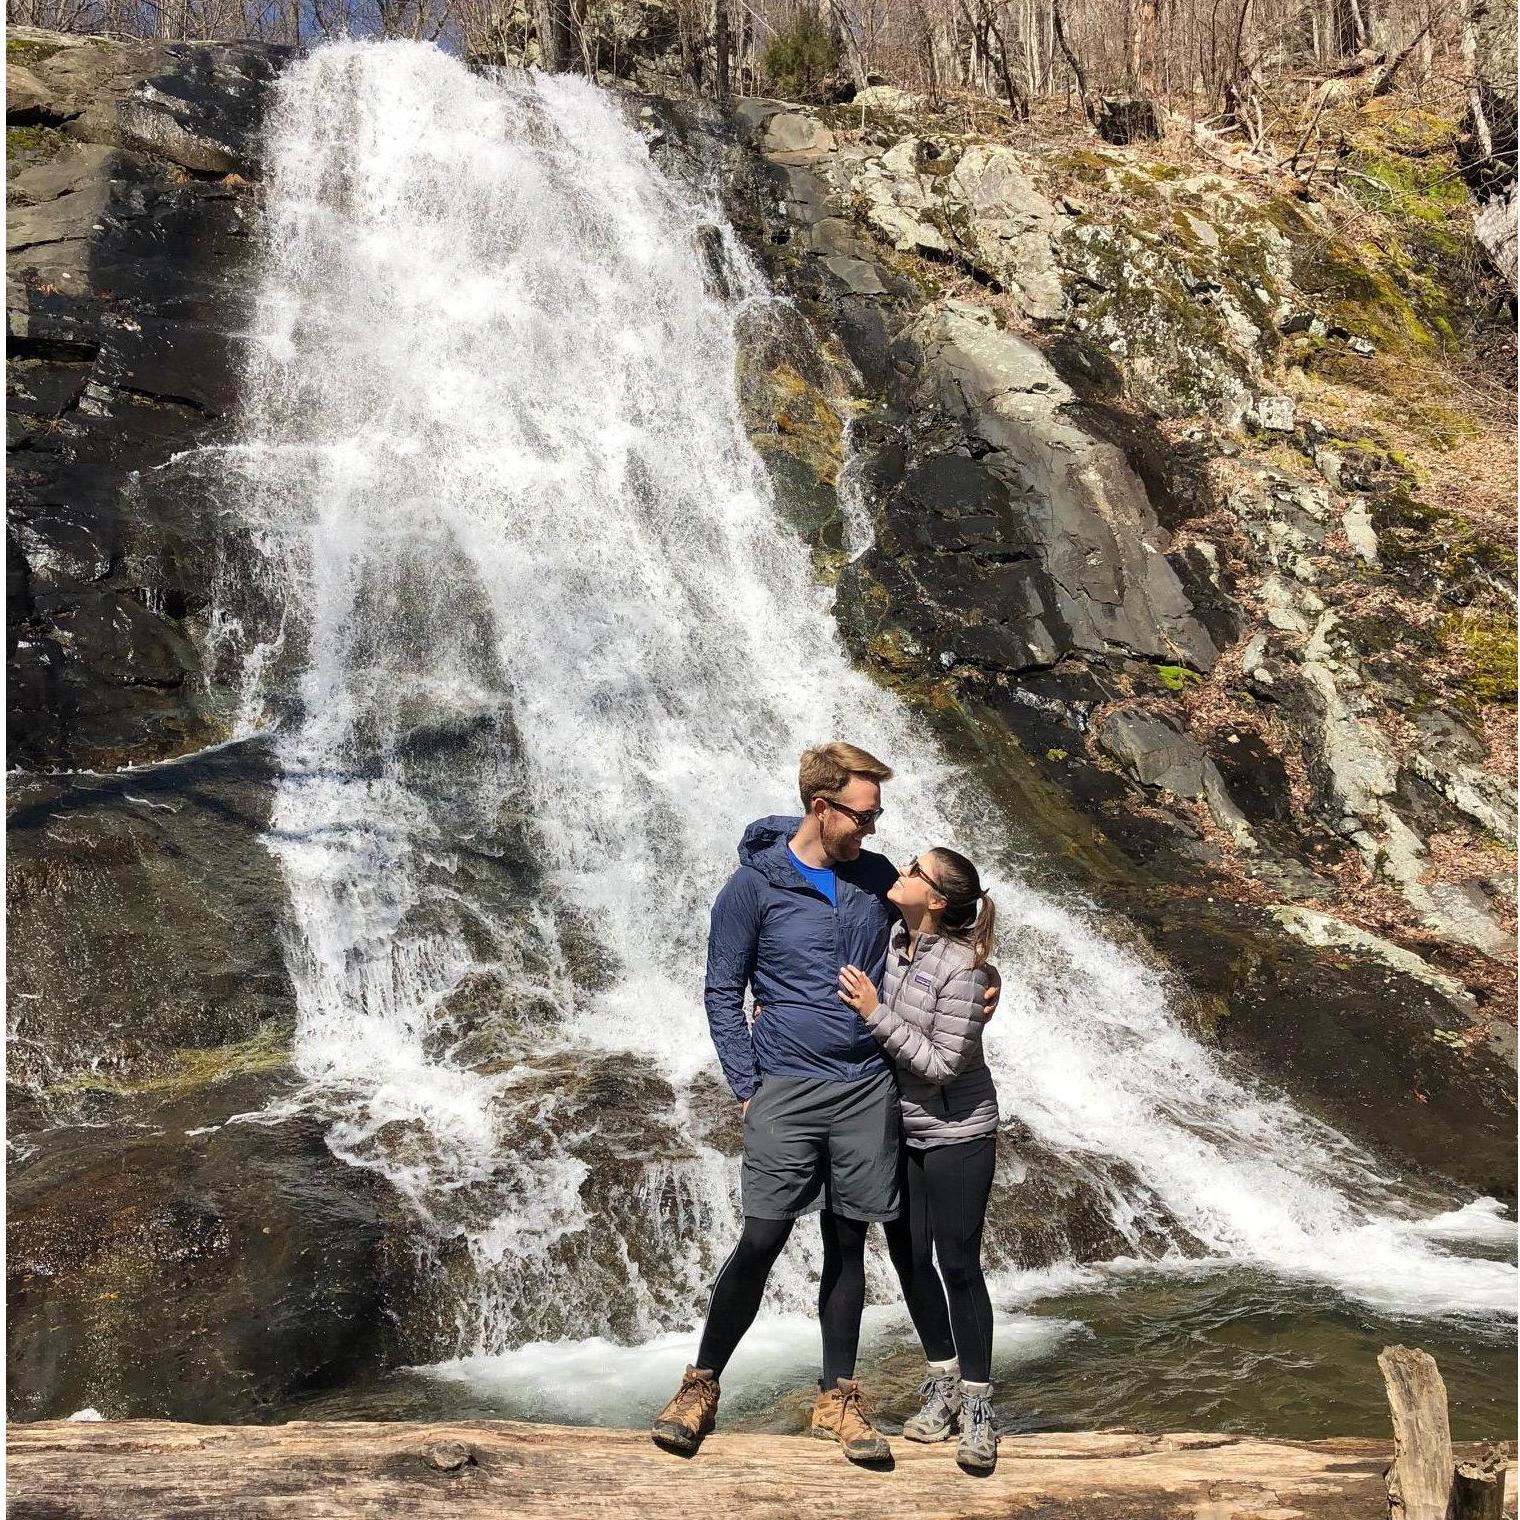 Here's to our lives together - and a lot more hikes like this.